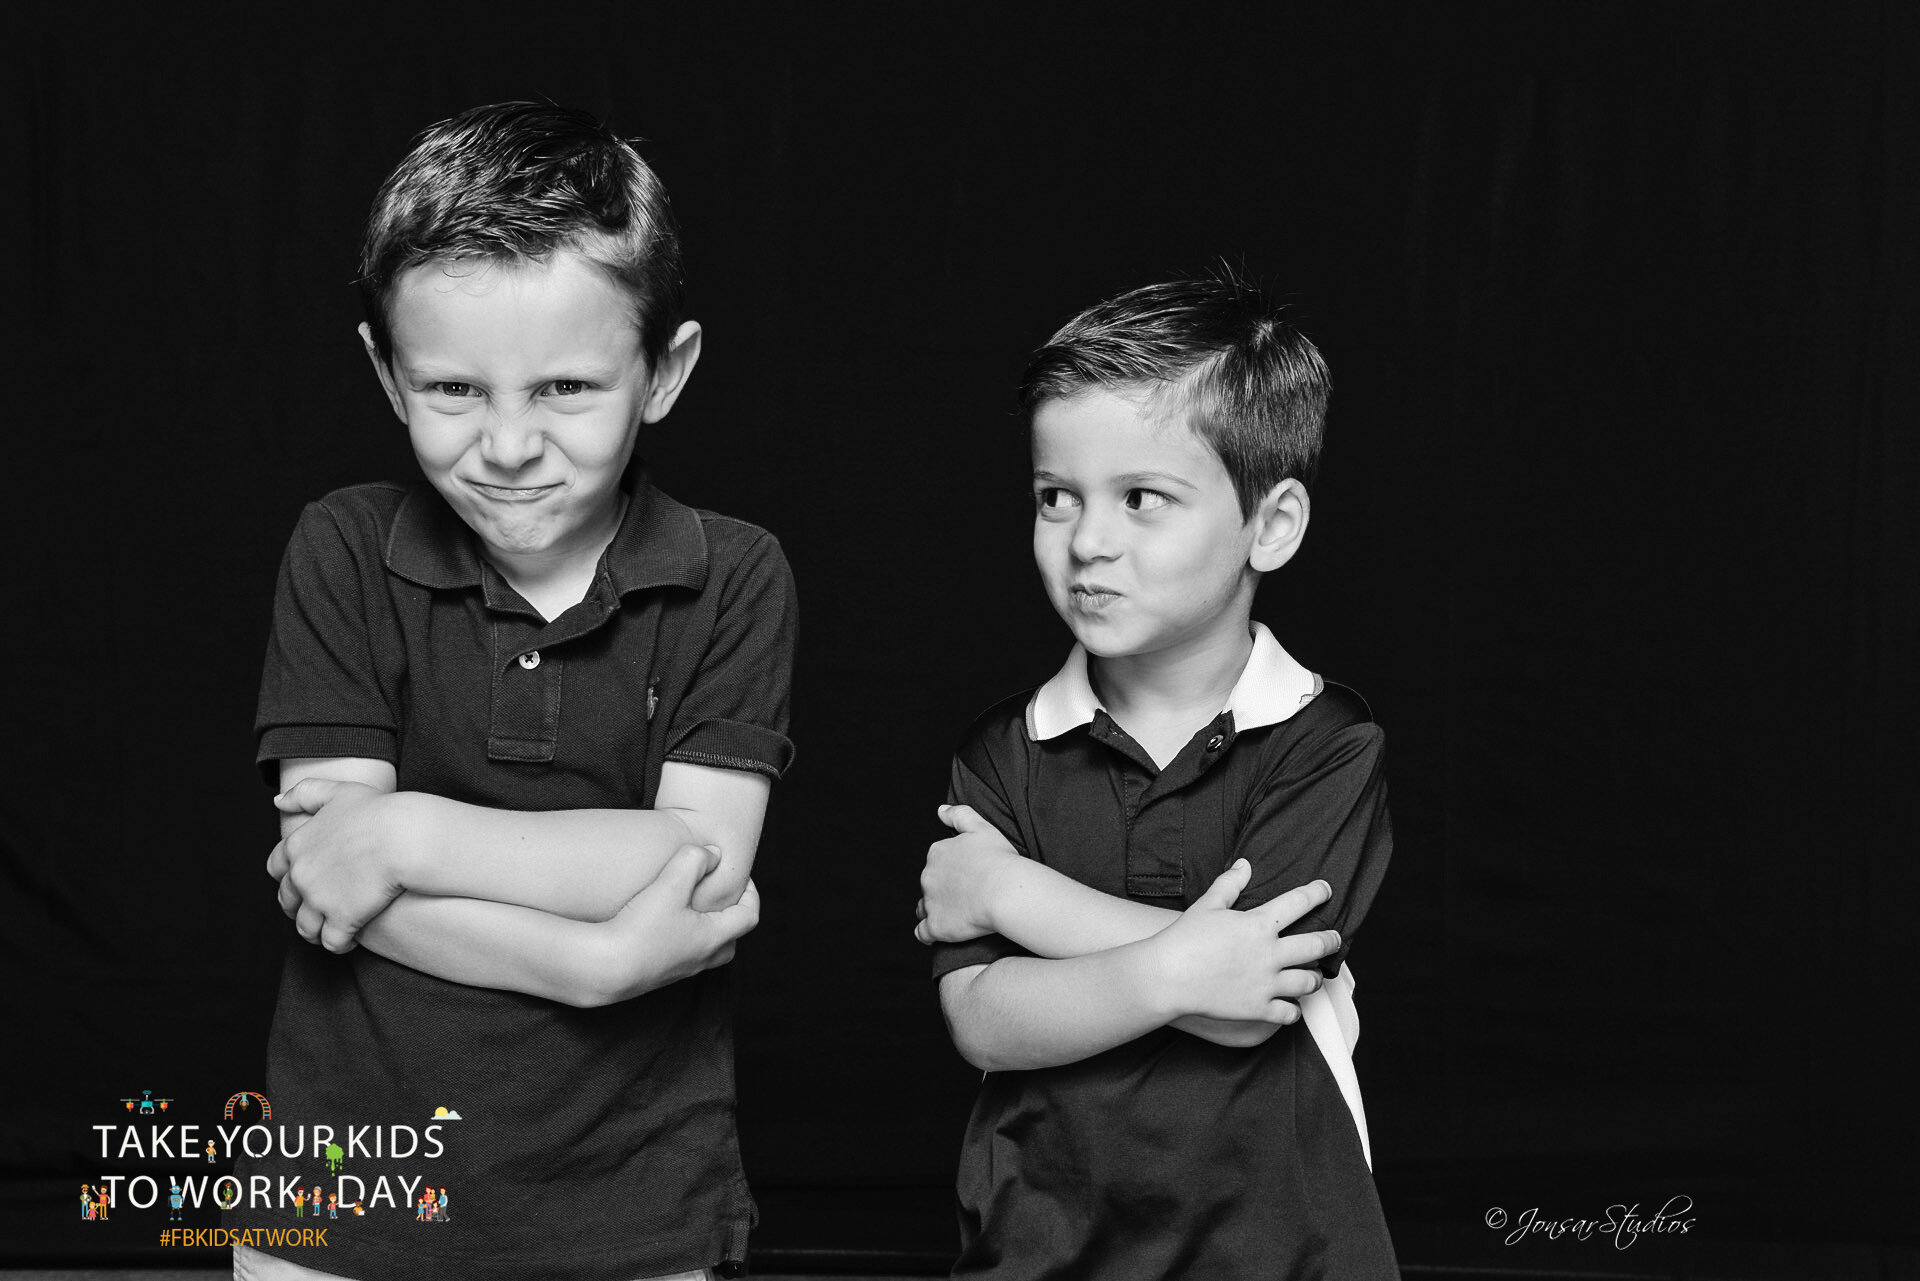 BW portrait of two young brothers